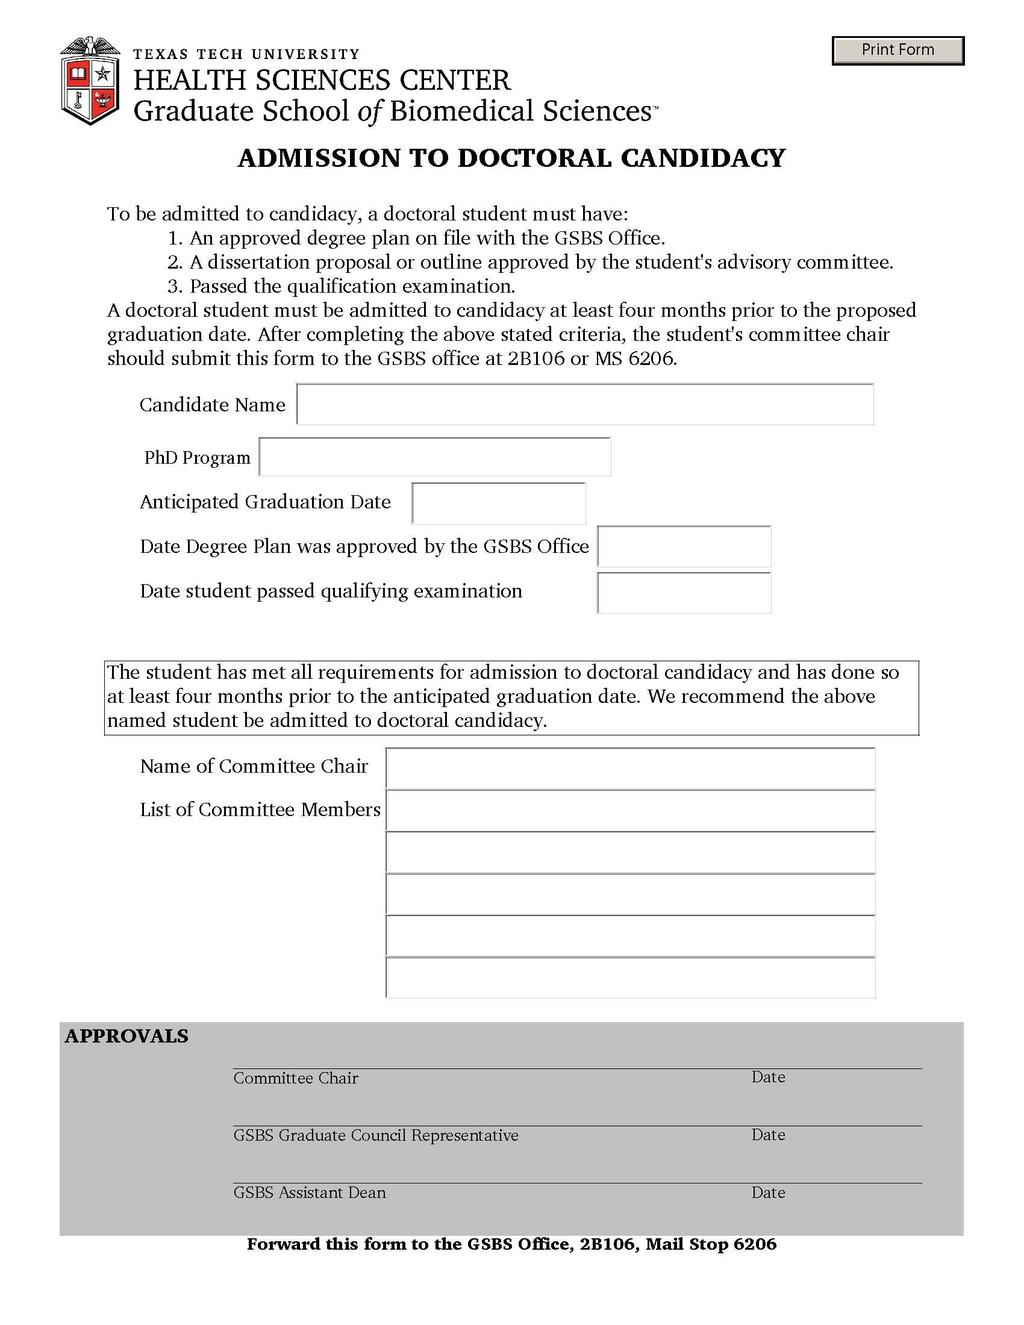 ADMISSION TO CANDIDACY REQUEST (MUST BE COMPLETED ON-LINE AT: http://www.ttuhsc.